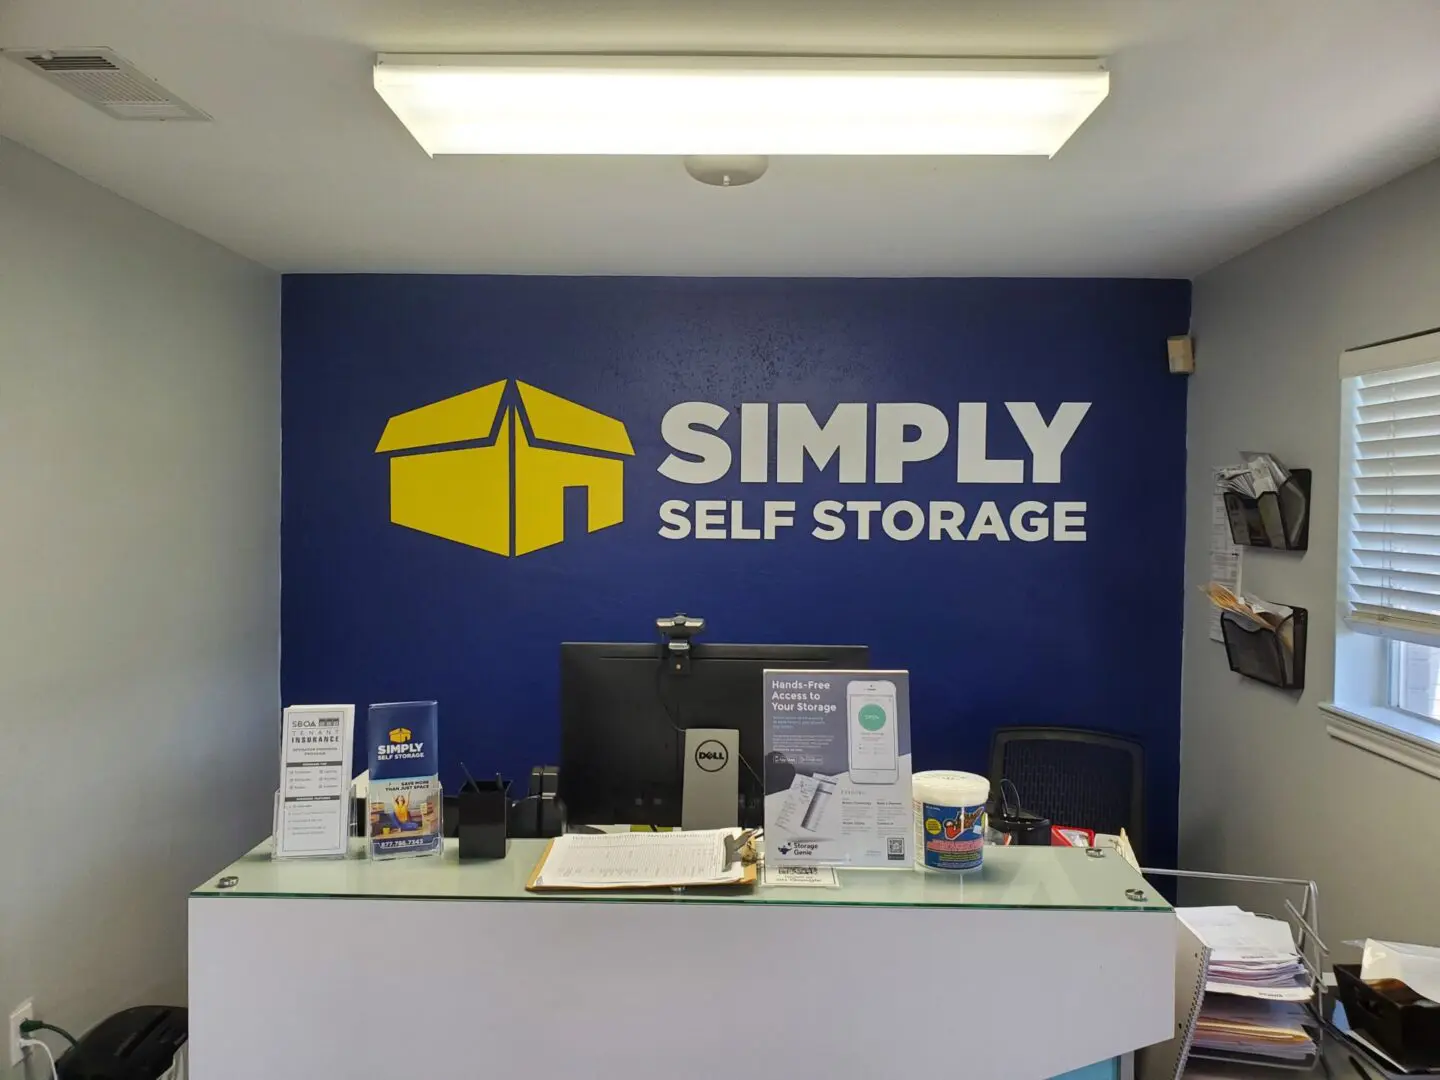 Simply self storage logo on blue color wall